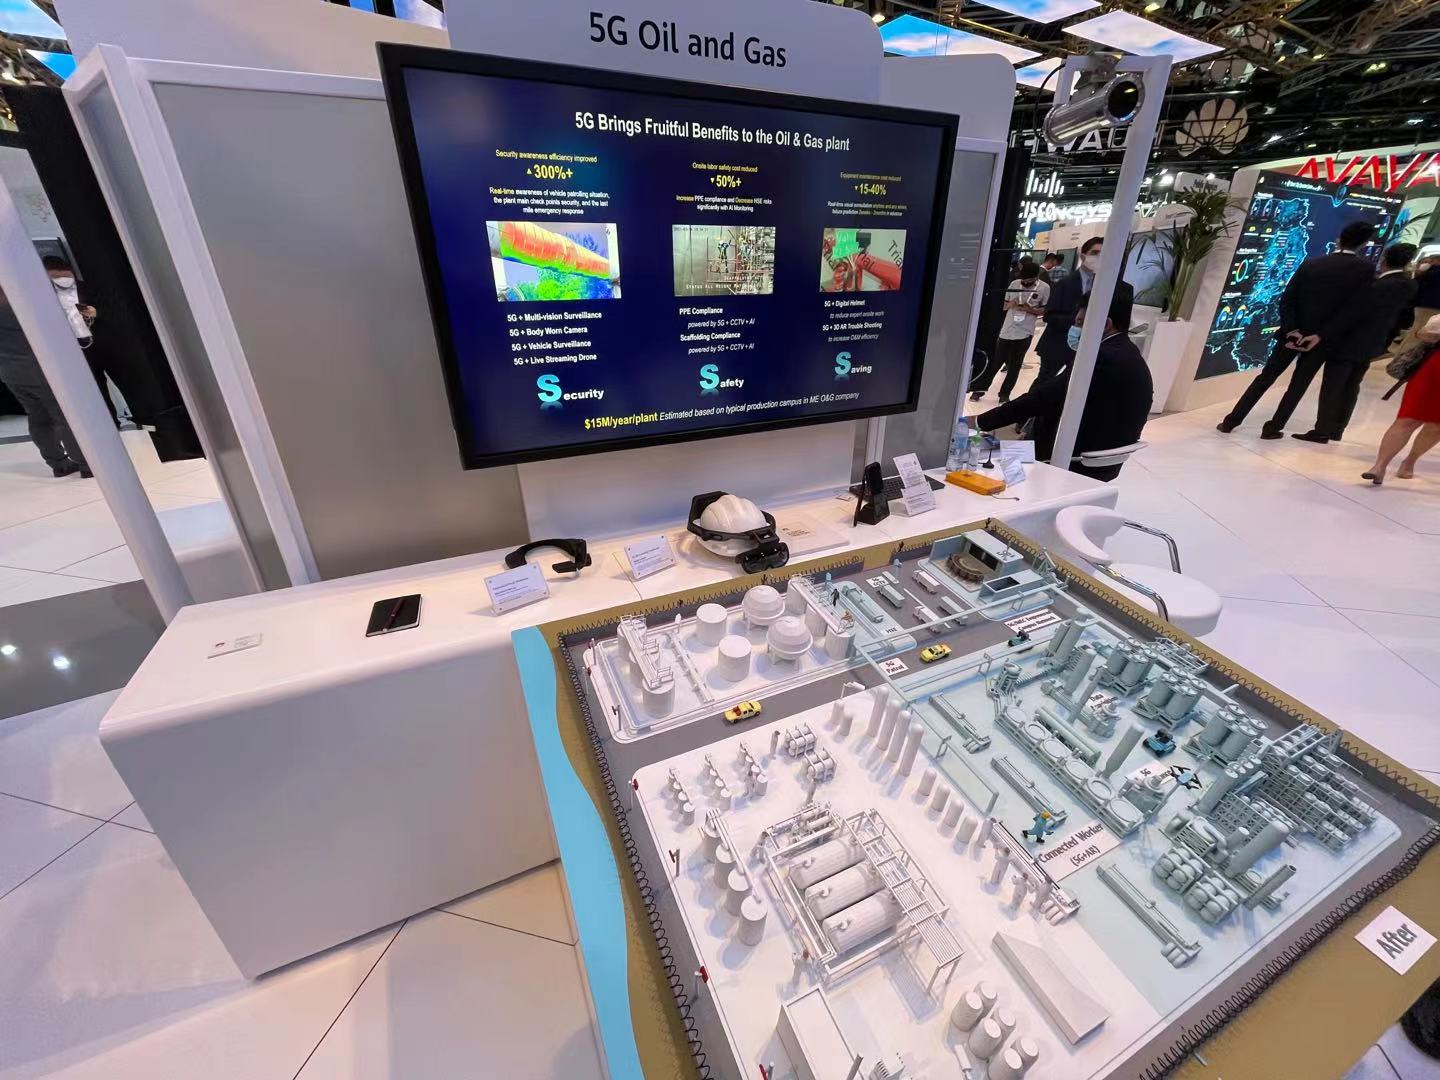 5G Brings Fruitful Benefits to the Oil& Gas Plant in Dubai